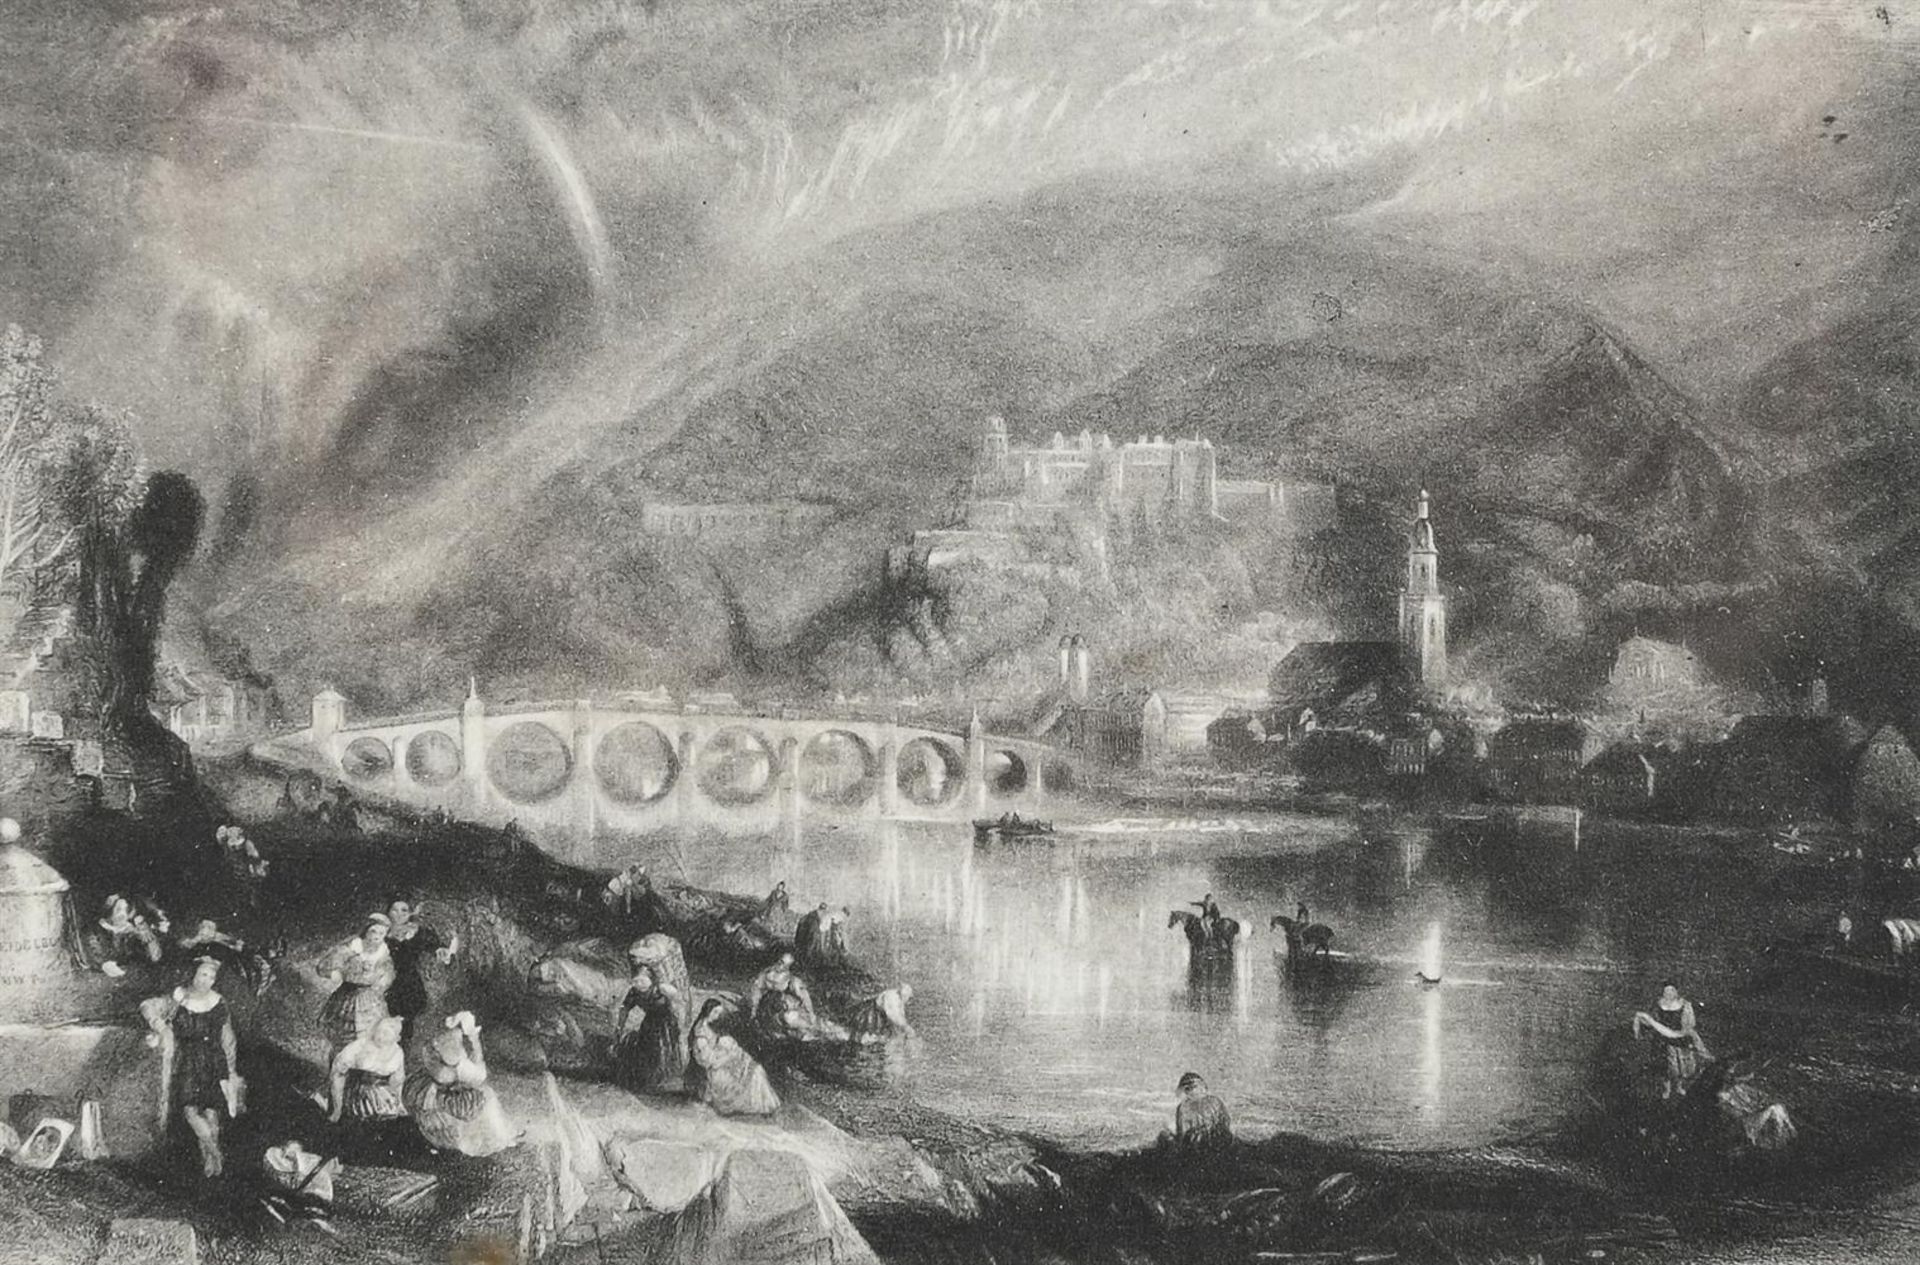 T. A. PRIOR AFTER J. M. W. TURNER, THE TOWN AND CASTLE OF HEIDELBERG